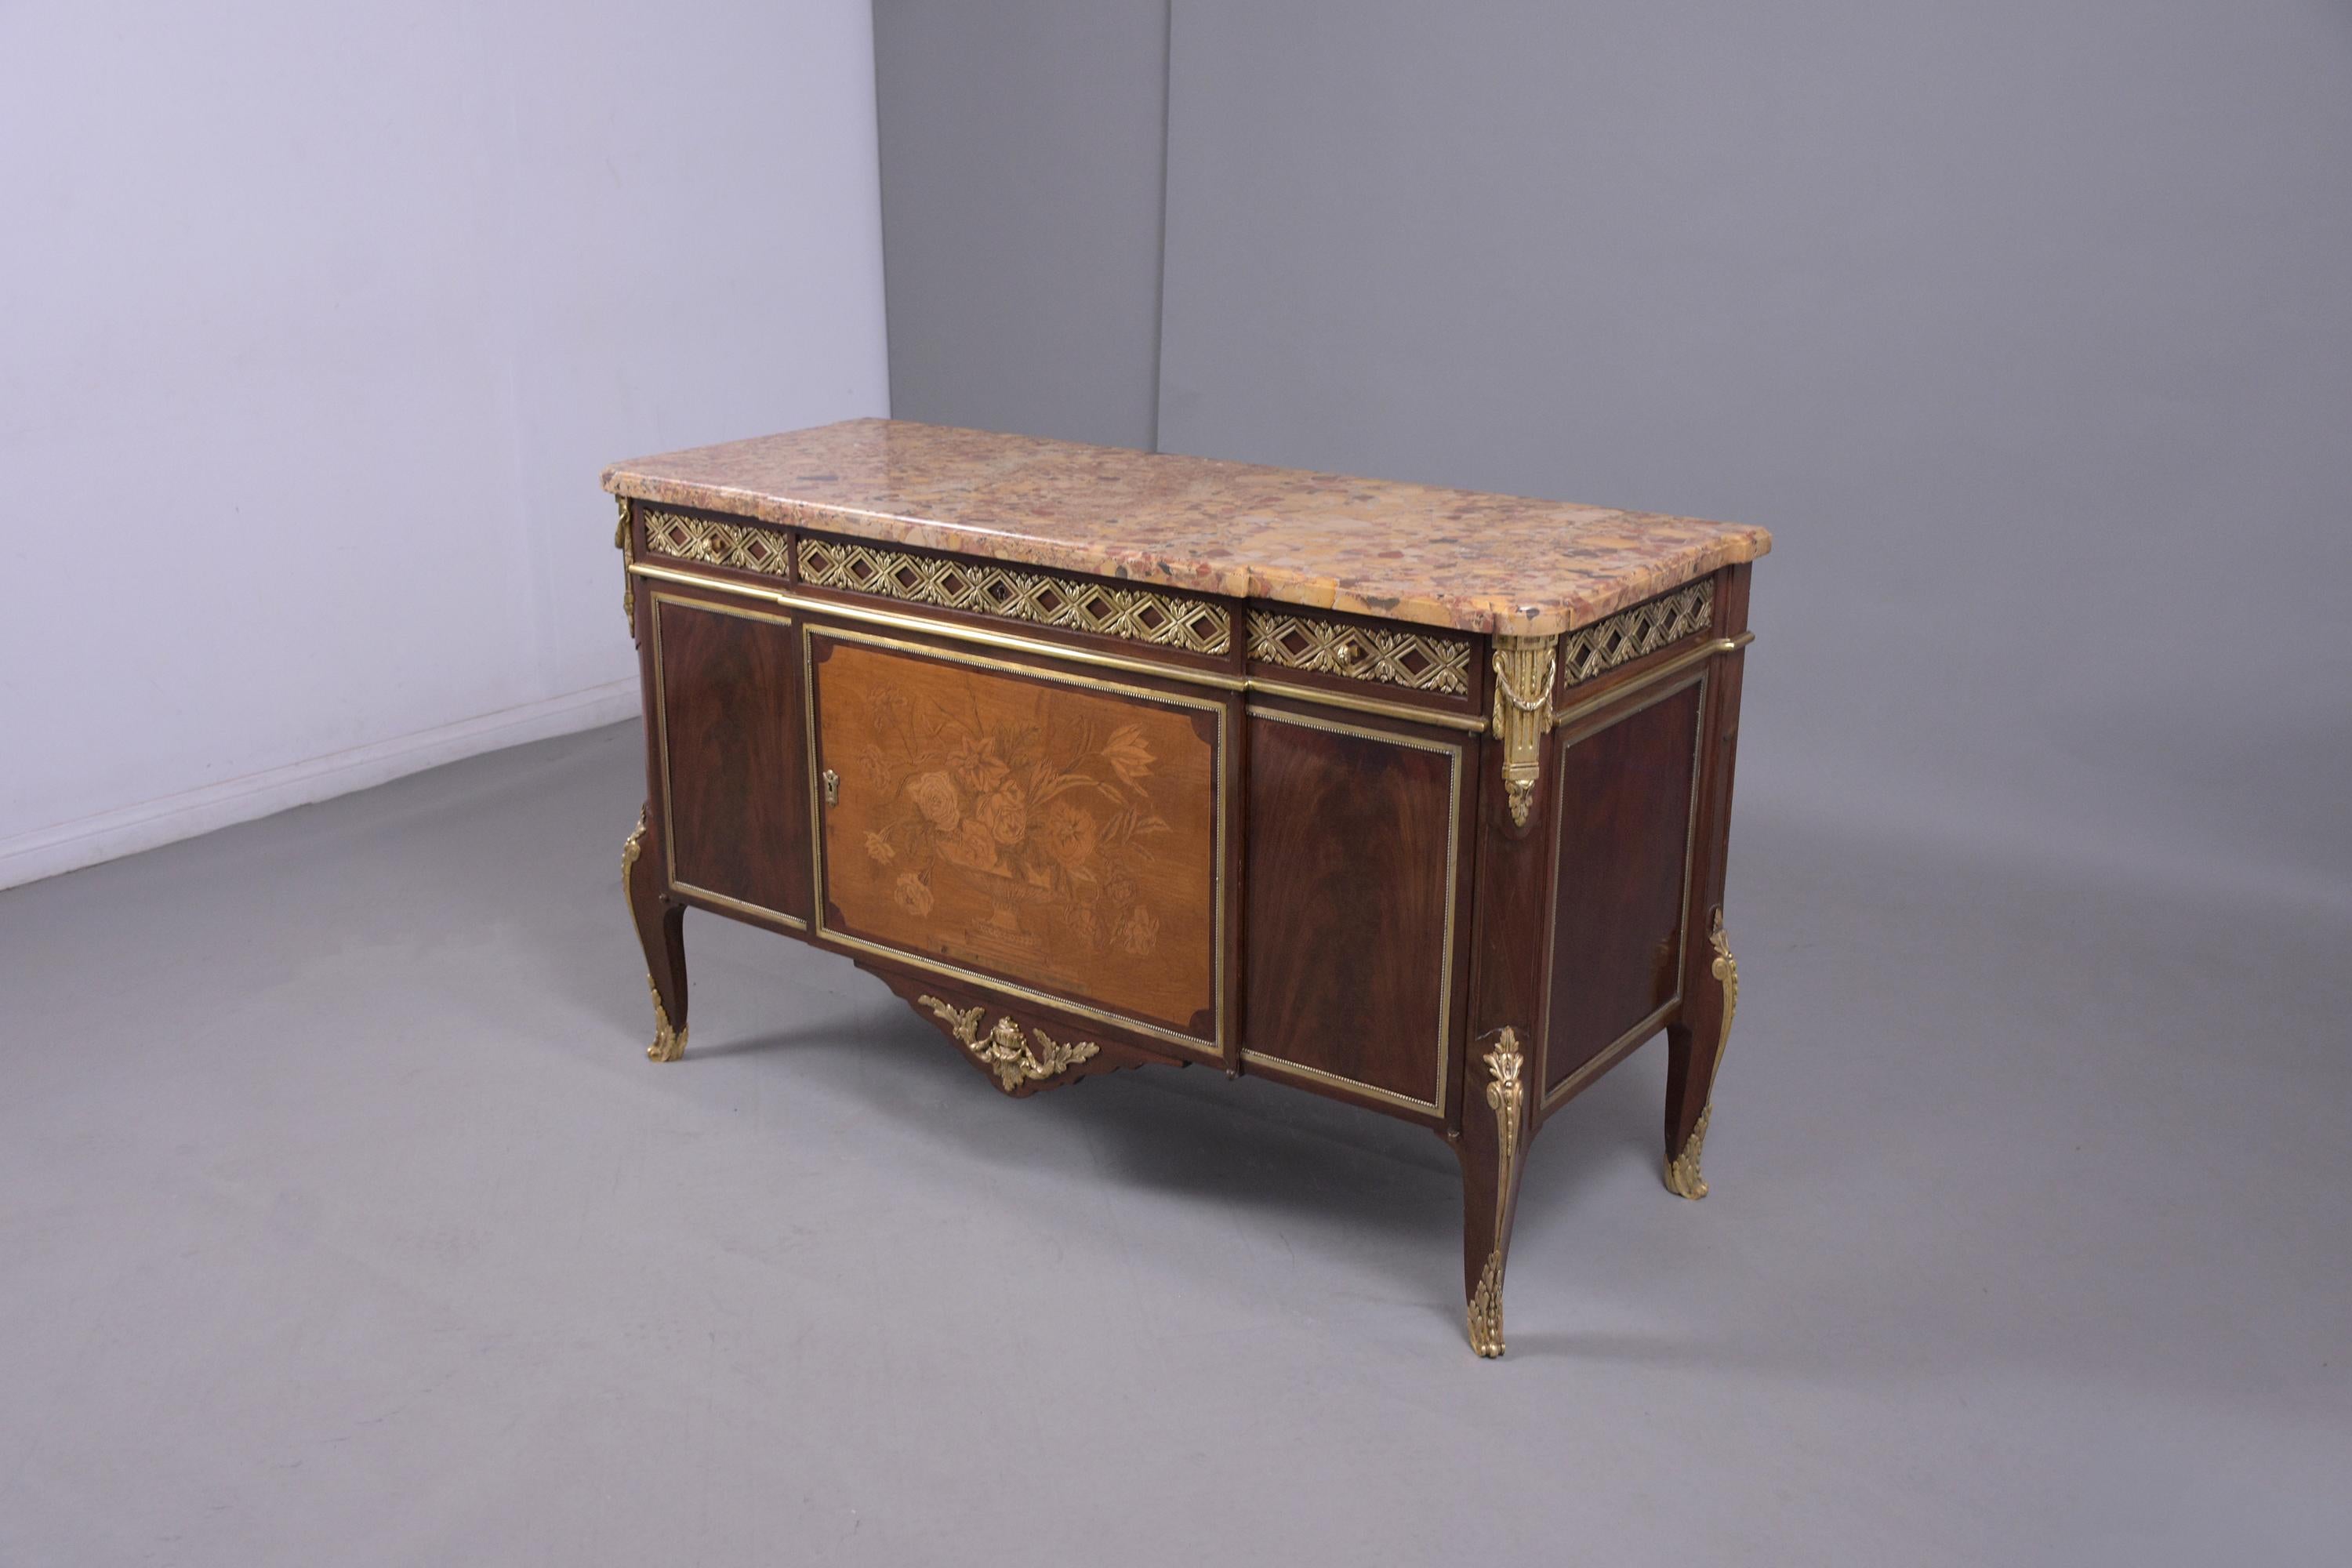 19th-Century French Louis XVI Buffet: Antique Mahogany and Bronze Marquetry Comm 1